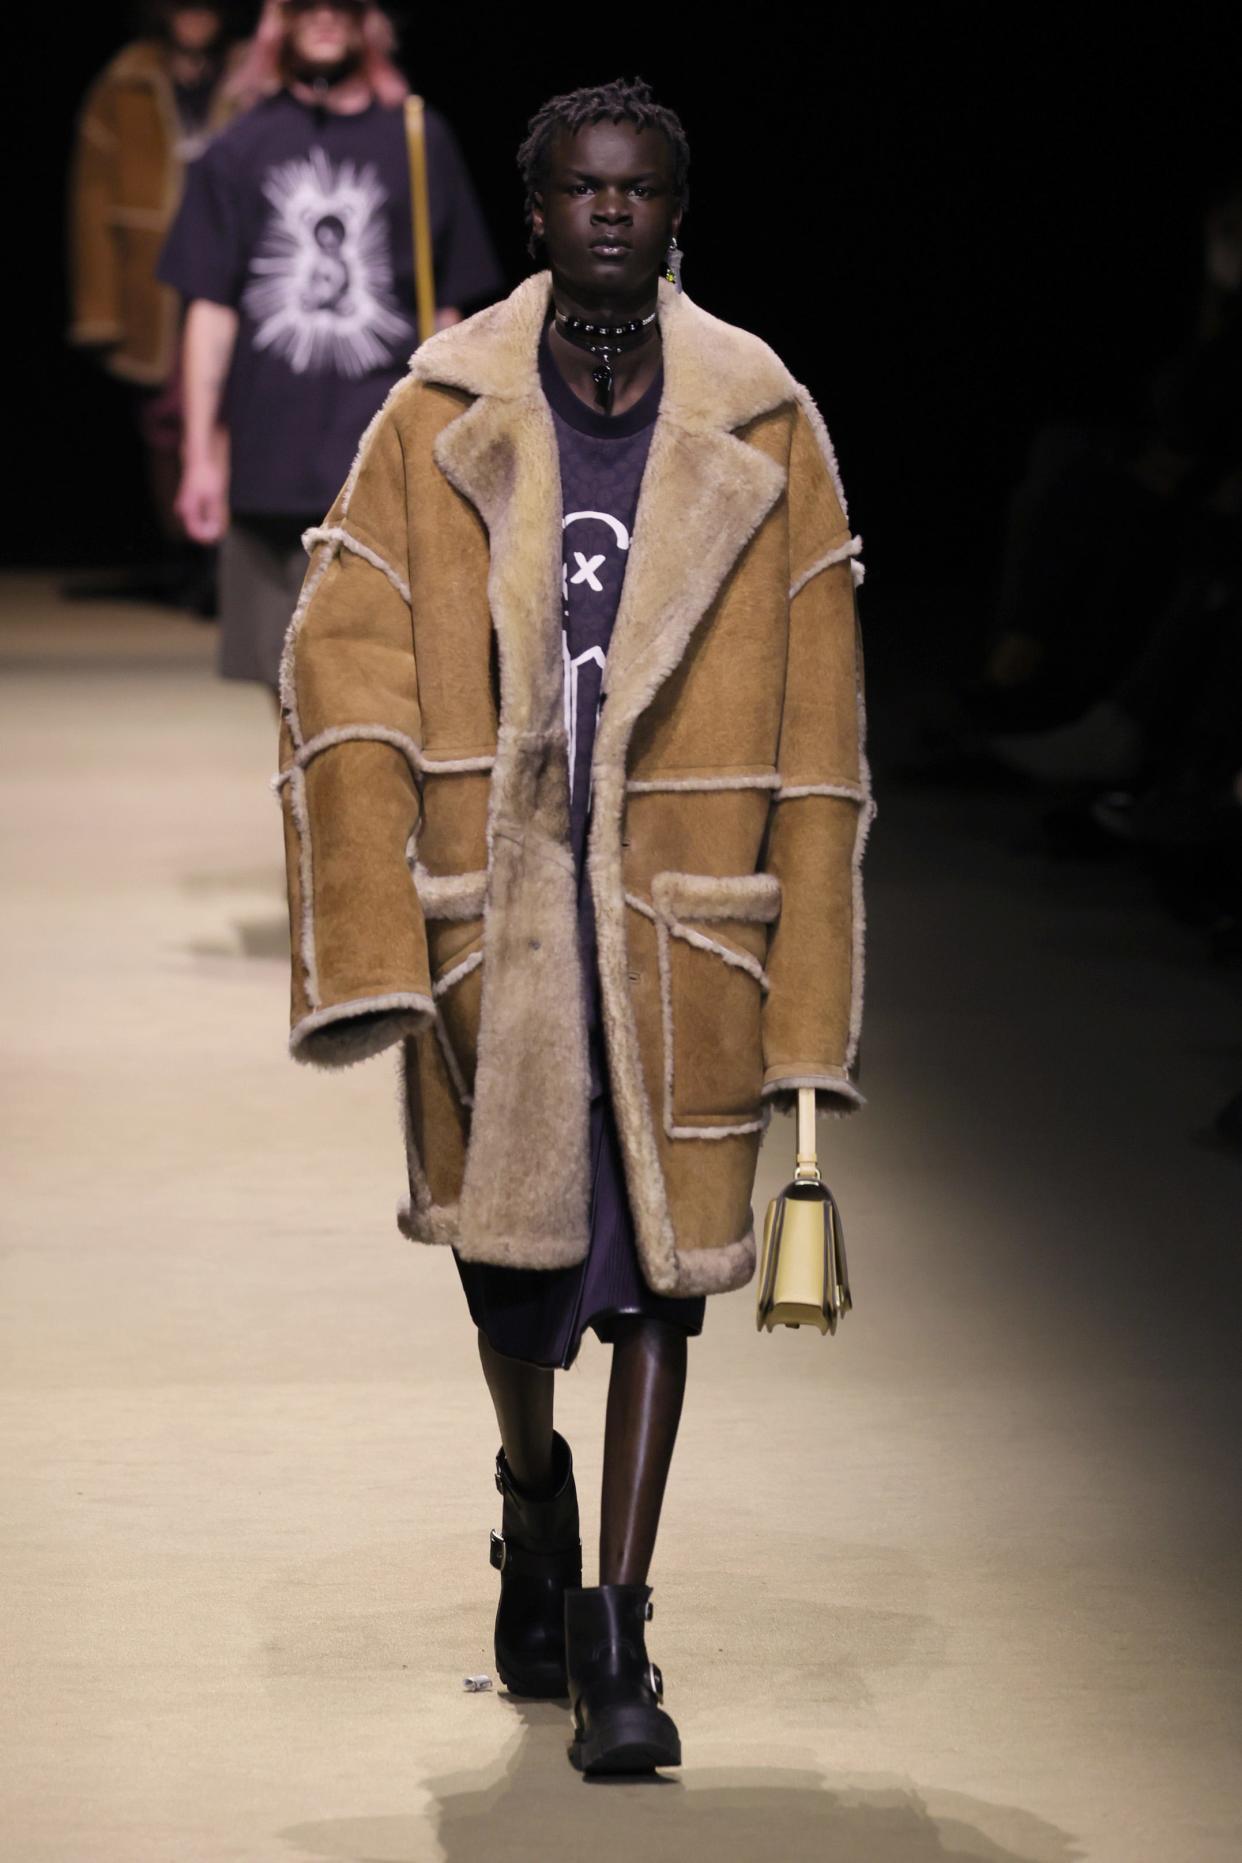 A model walks the runway for Coach during New York Fashion Week in New York City on Feb. 14, 2022.